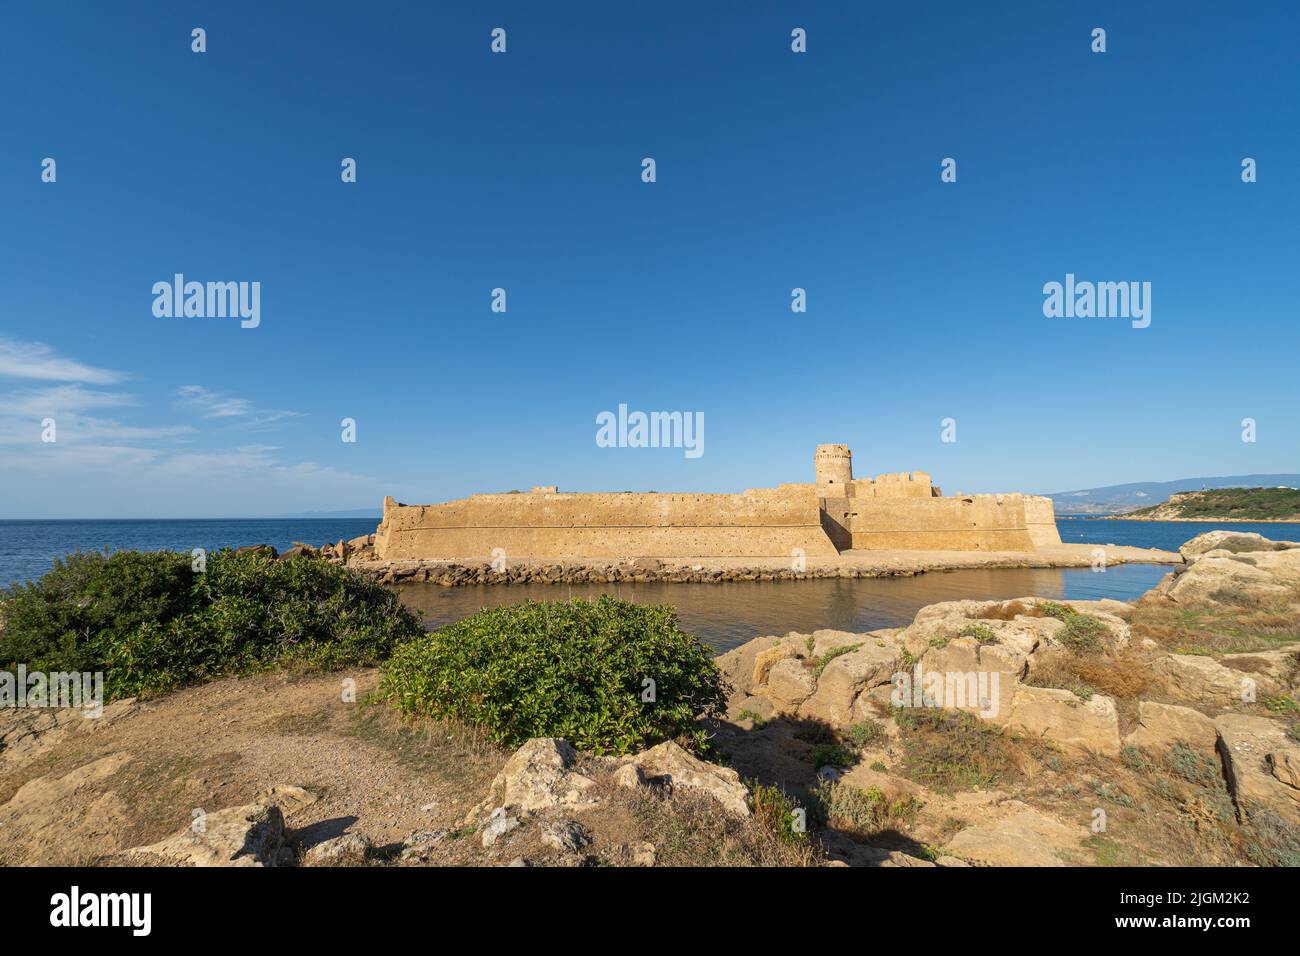 View of a fortress on the Italian coast Stock Photo